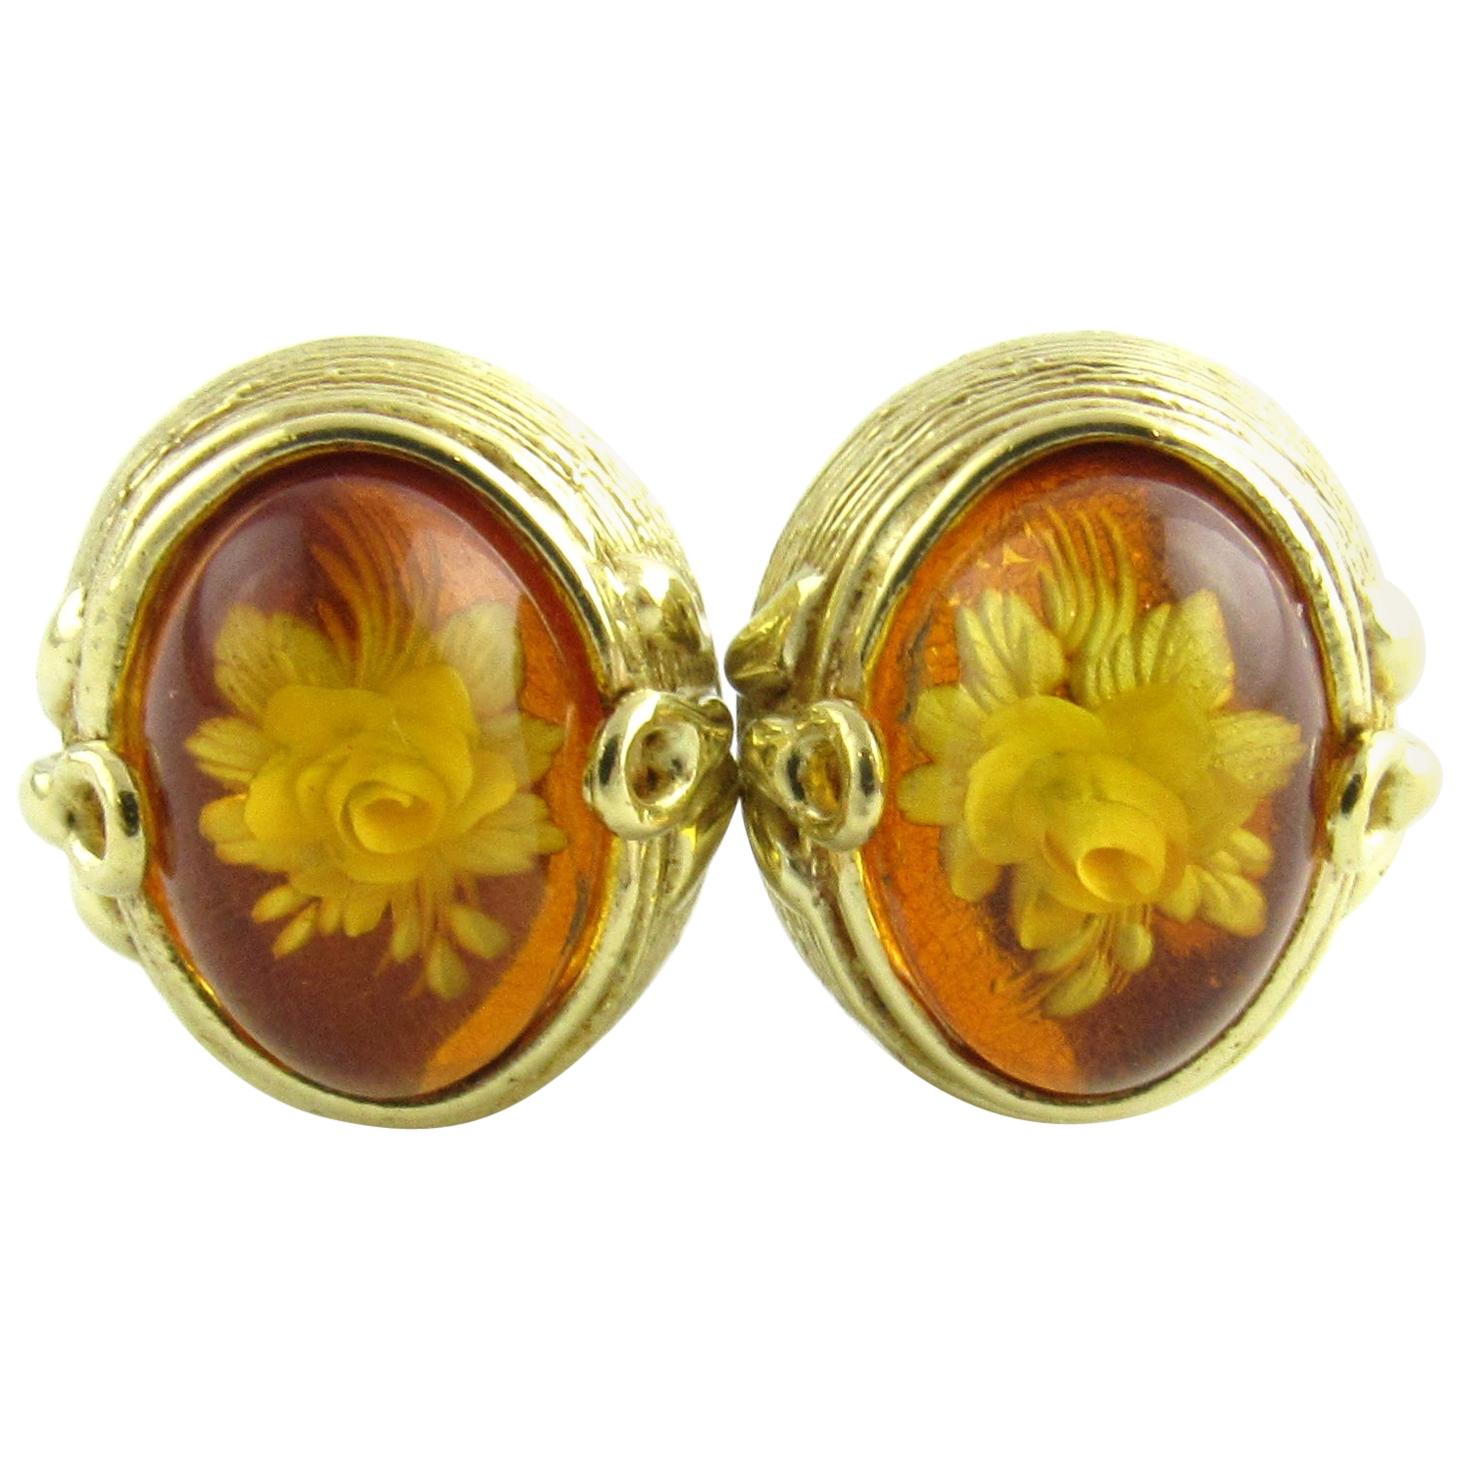 18 Karat Yellow Gold and Amber Floral Earrings